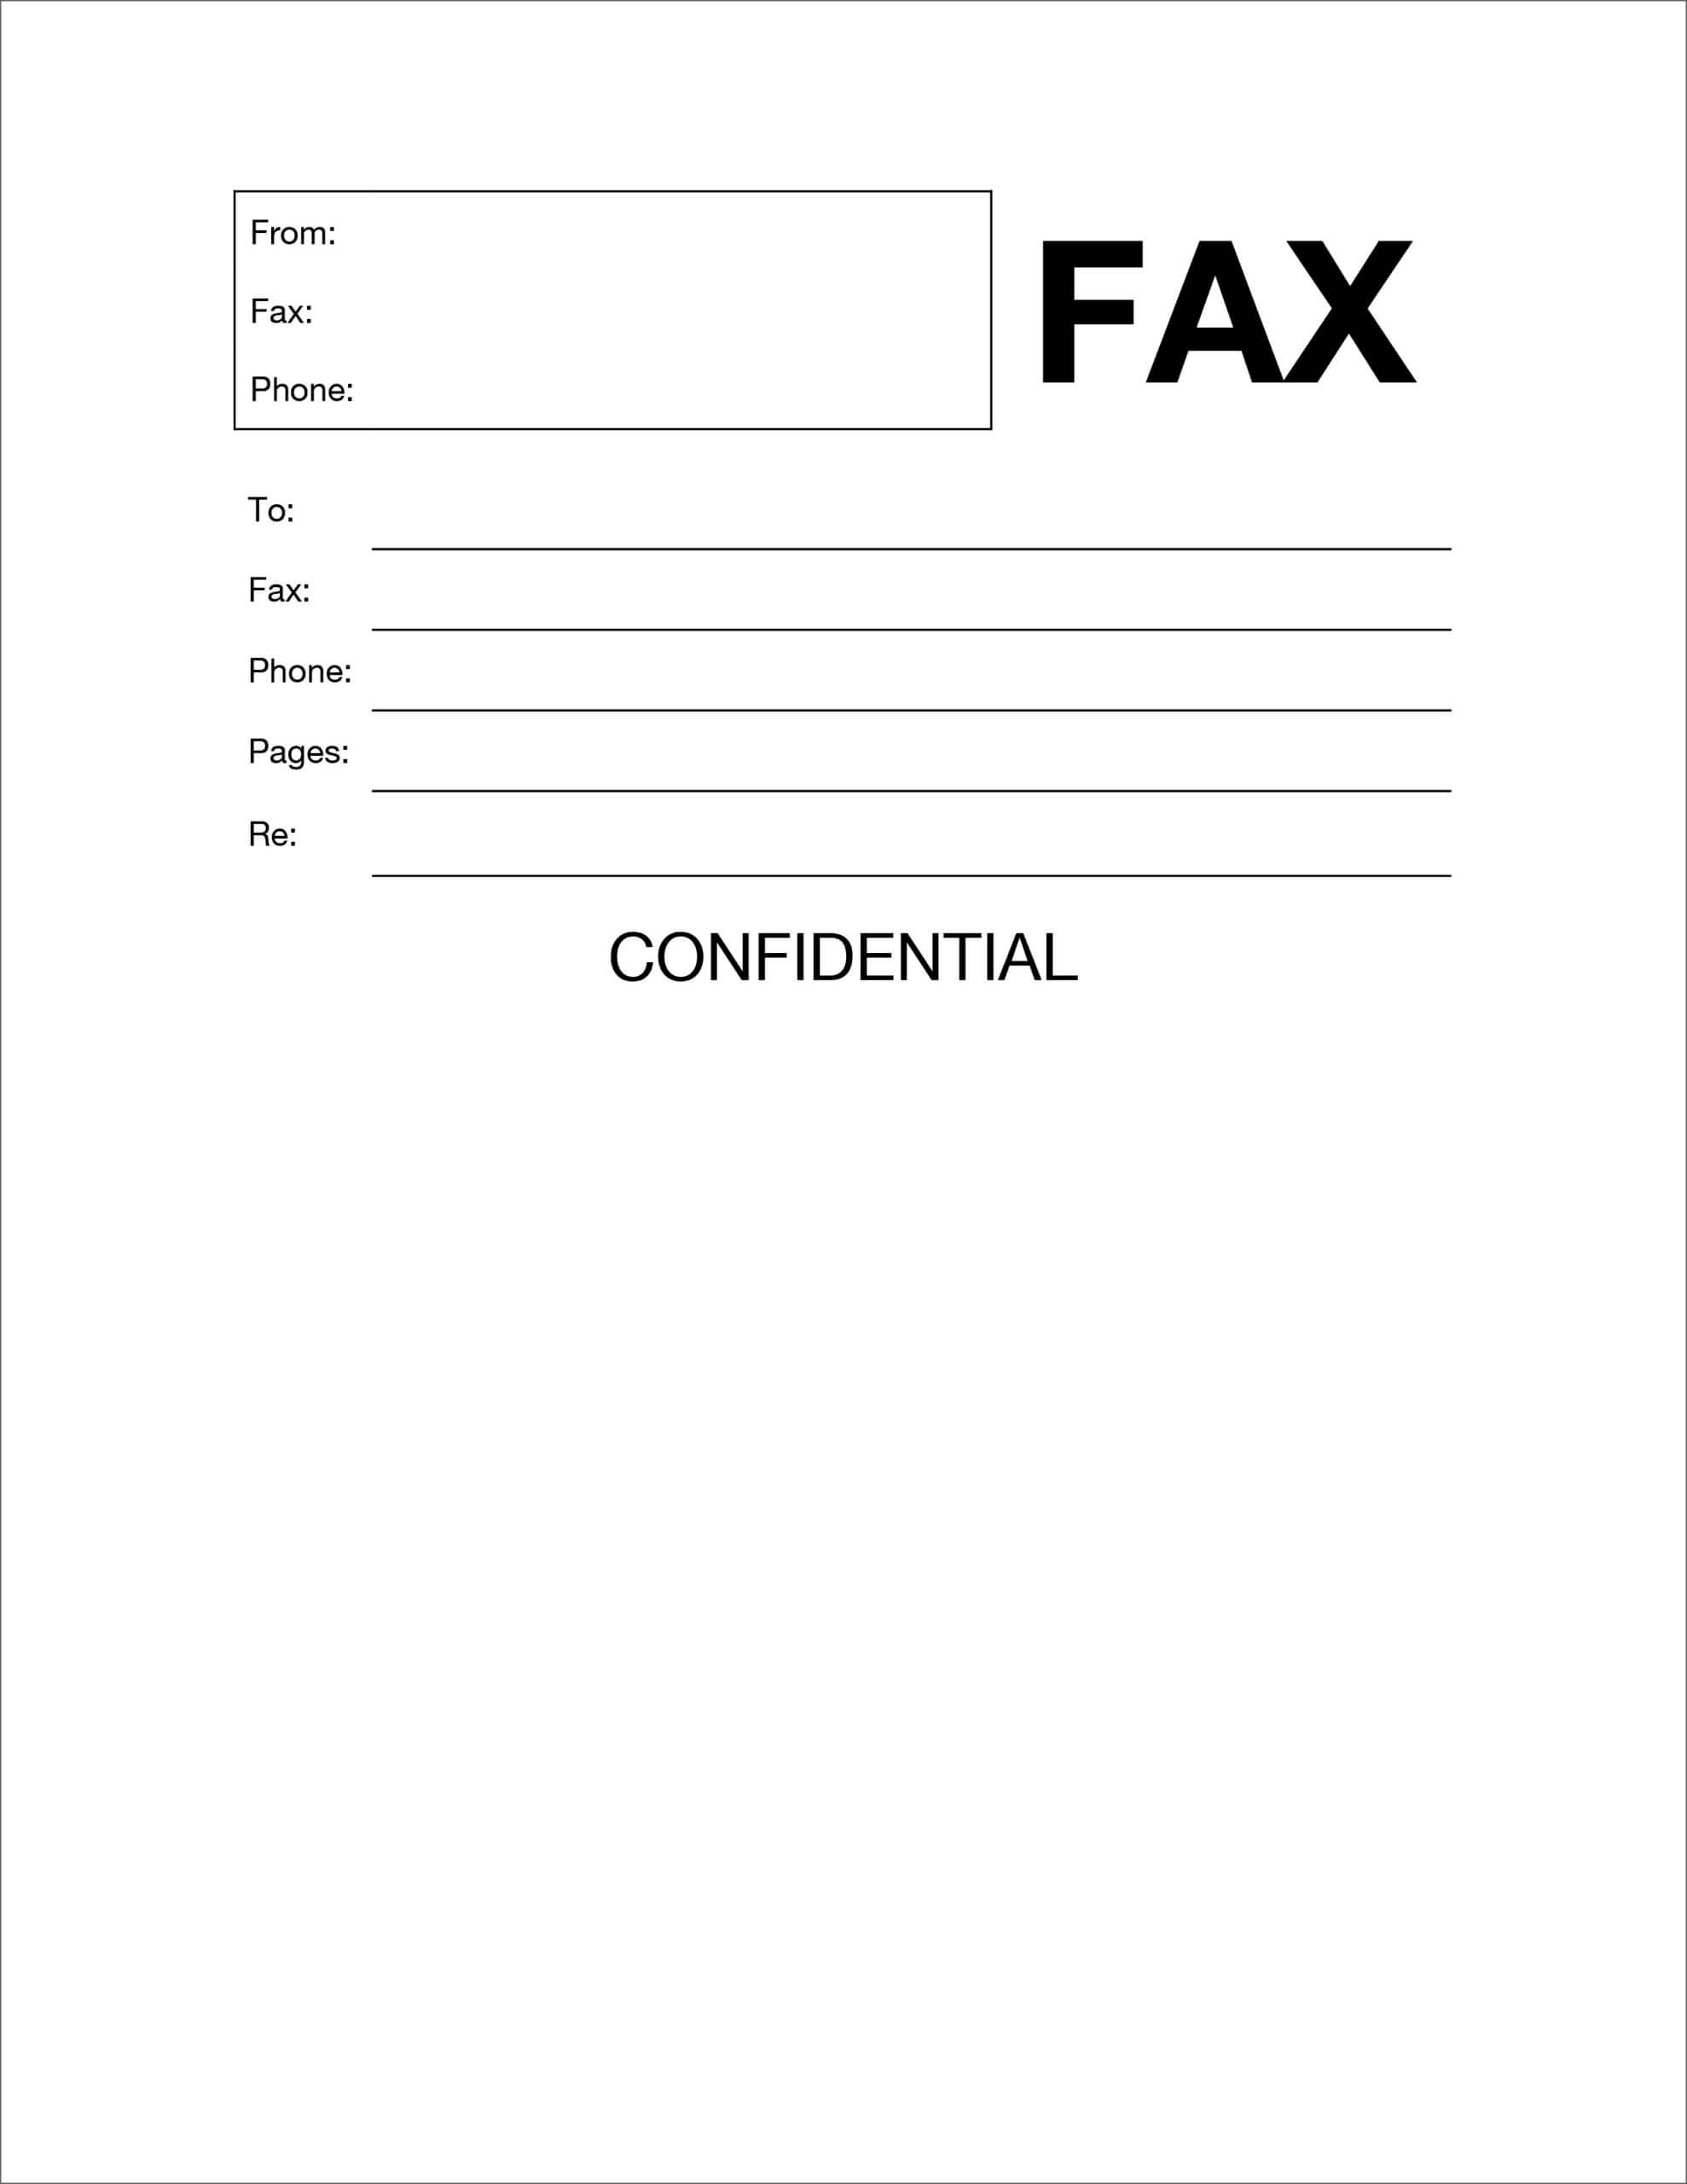 005 Fax Cover Page Template Word Ideas Microsoft Sheet Within Fax Template Word 2010